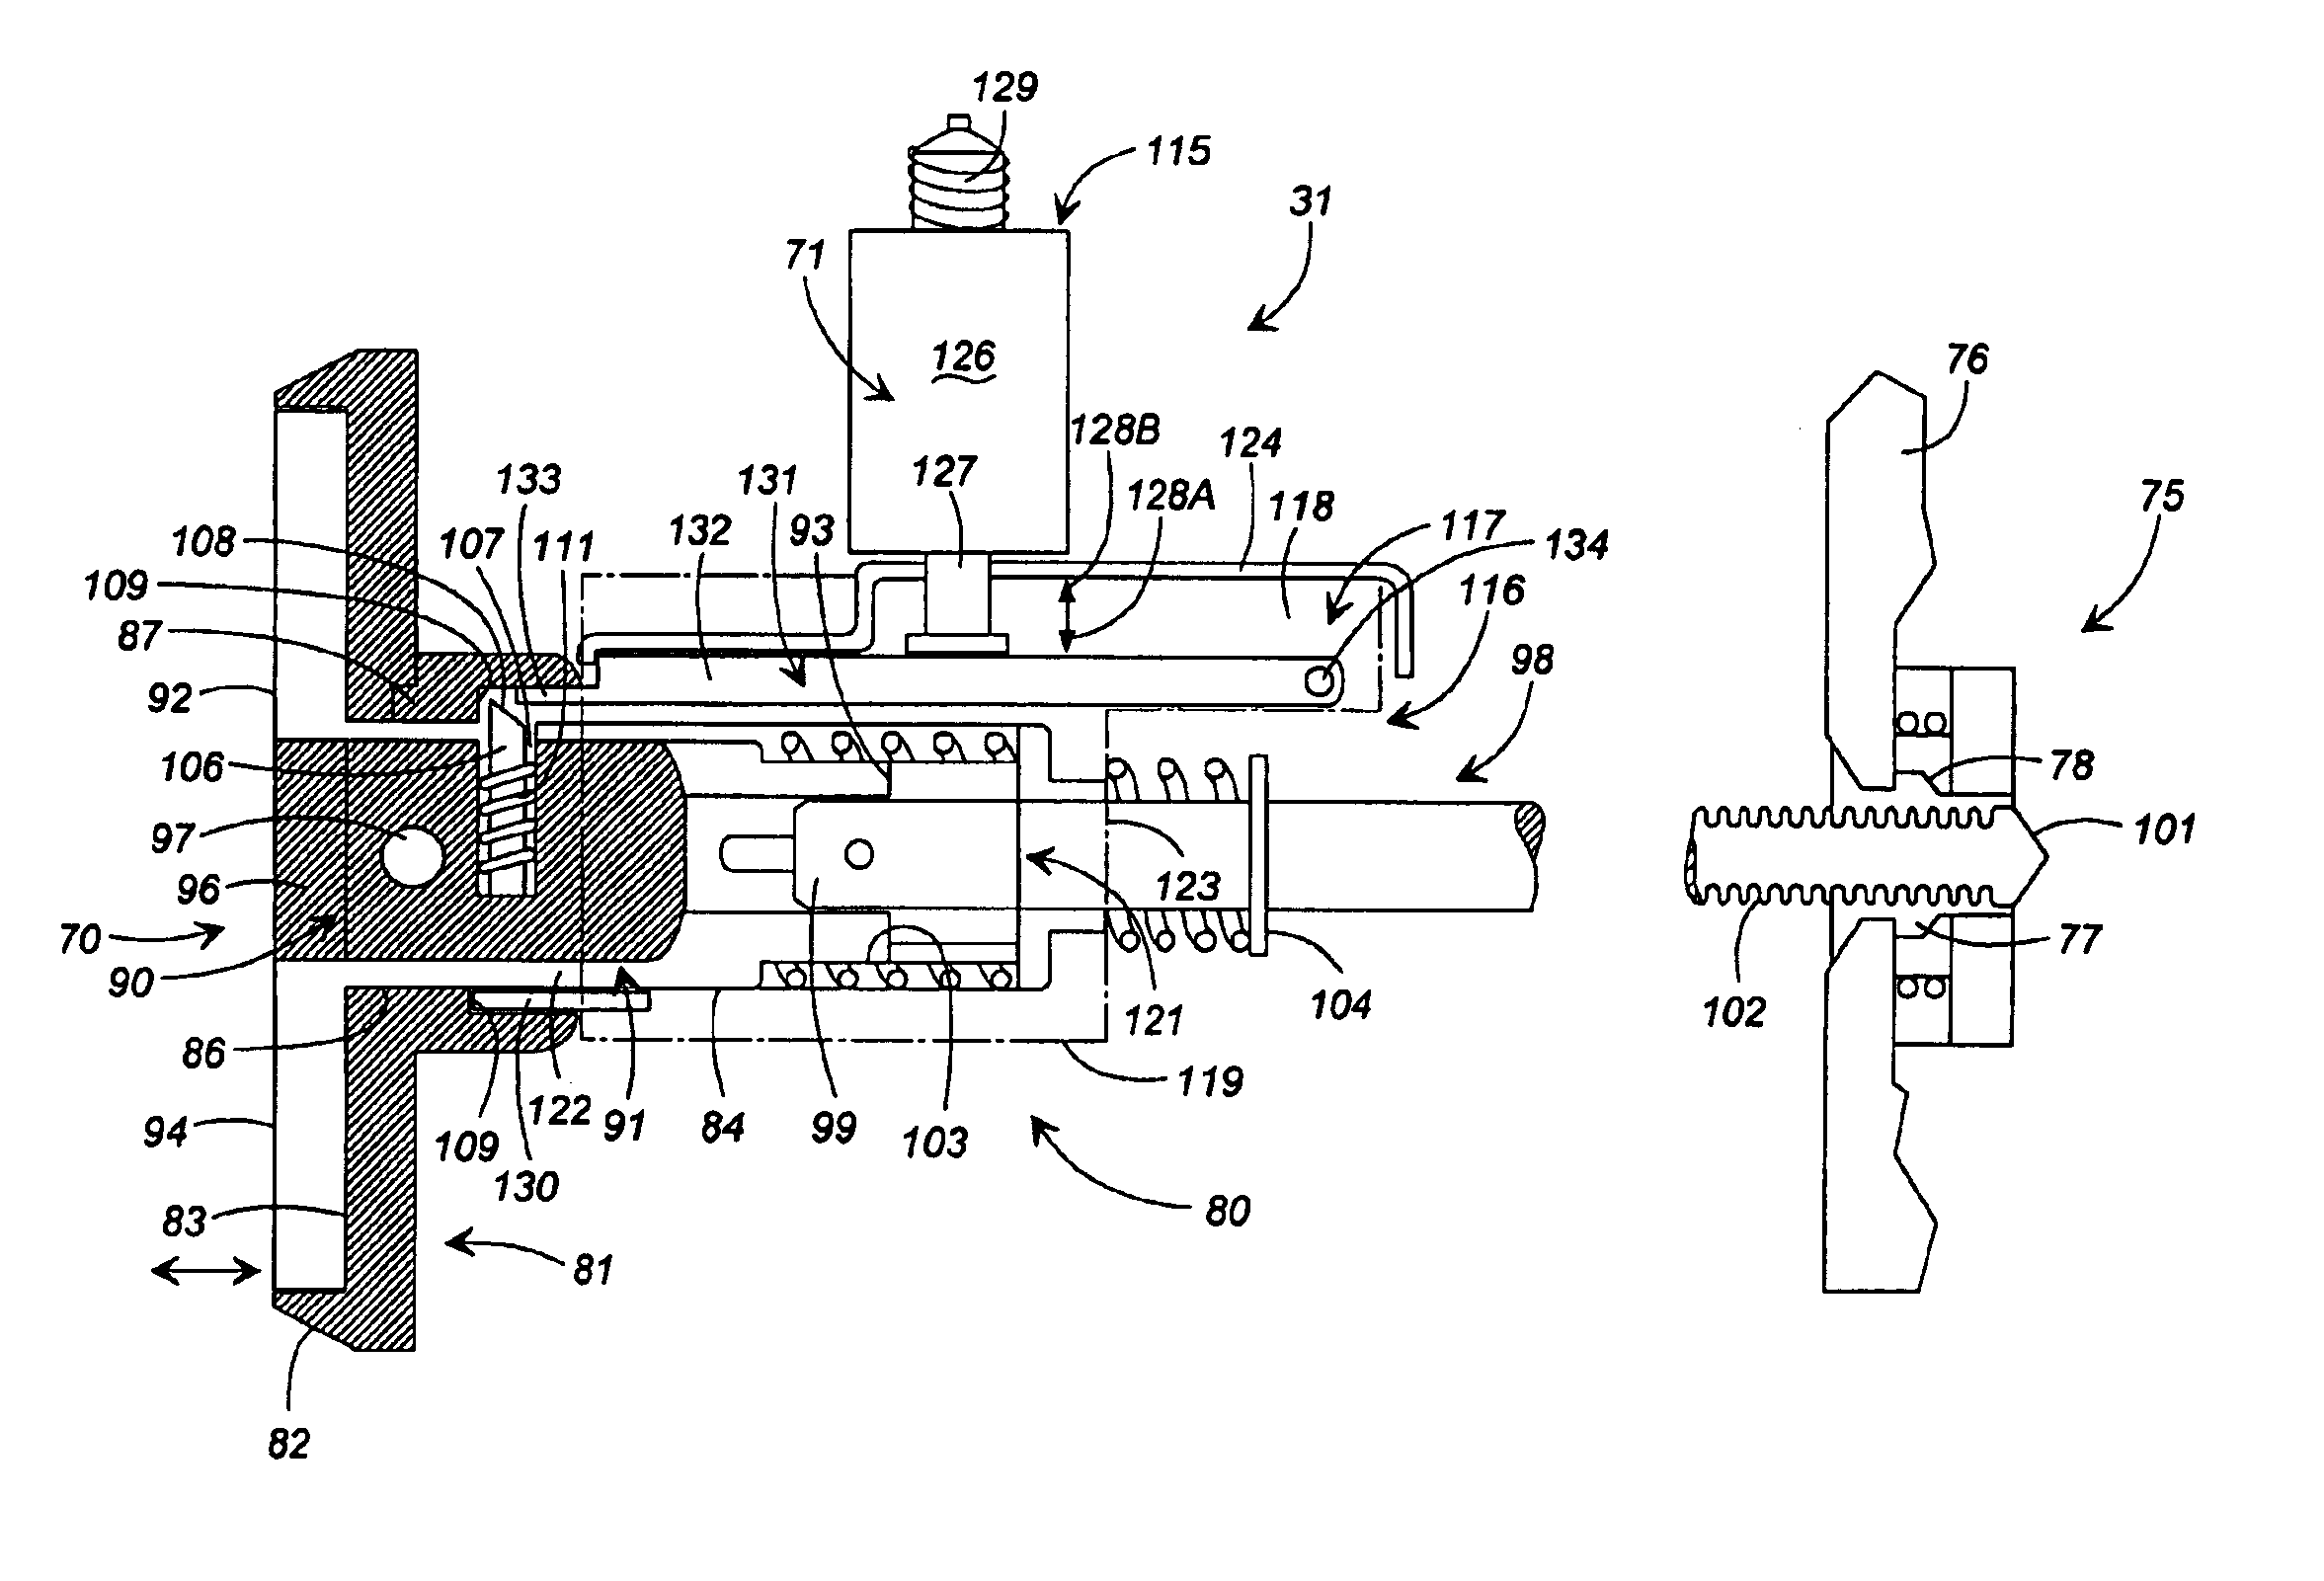 Electro-mechanical lock assembly